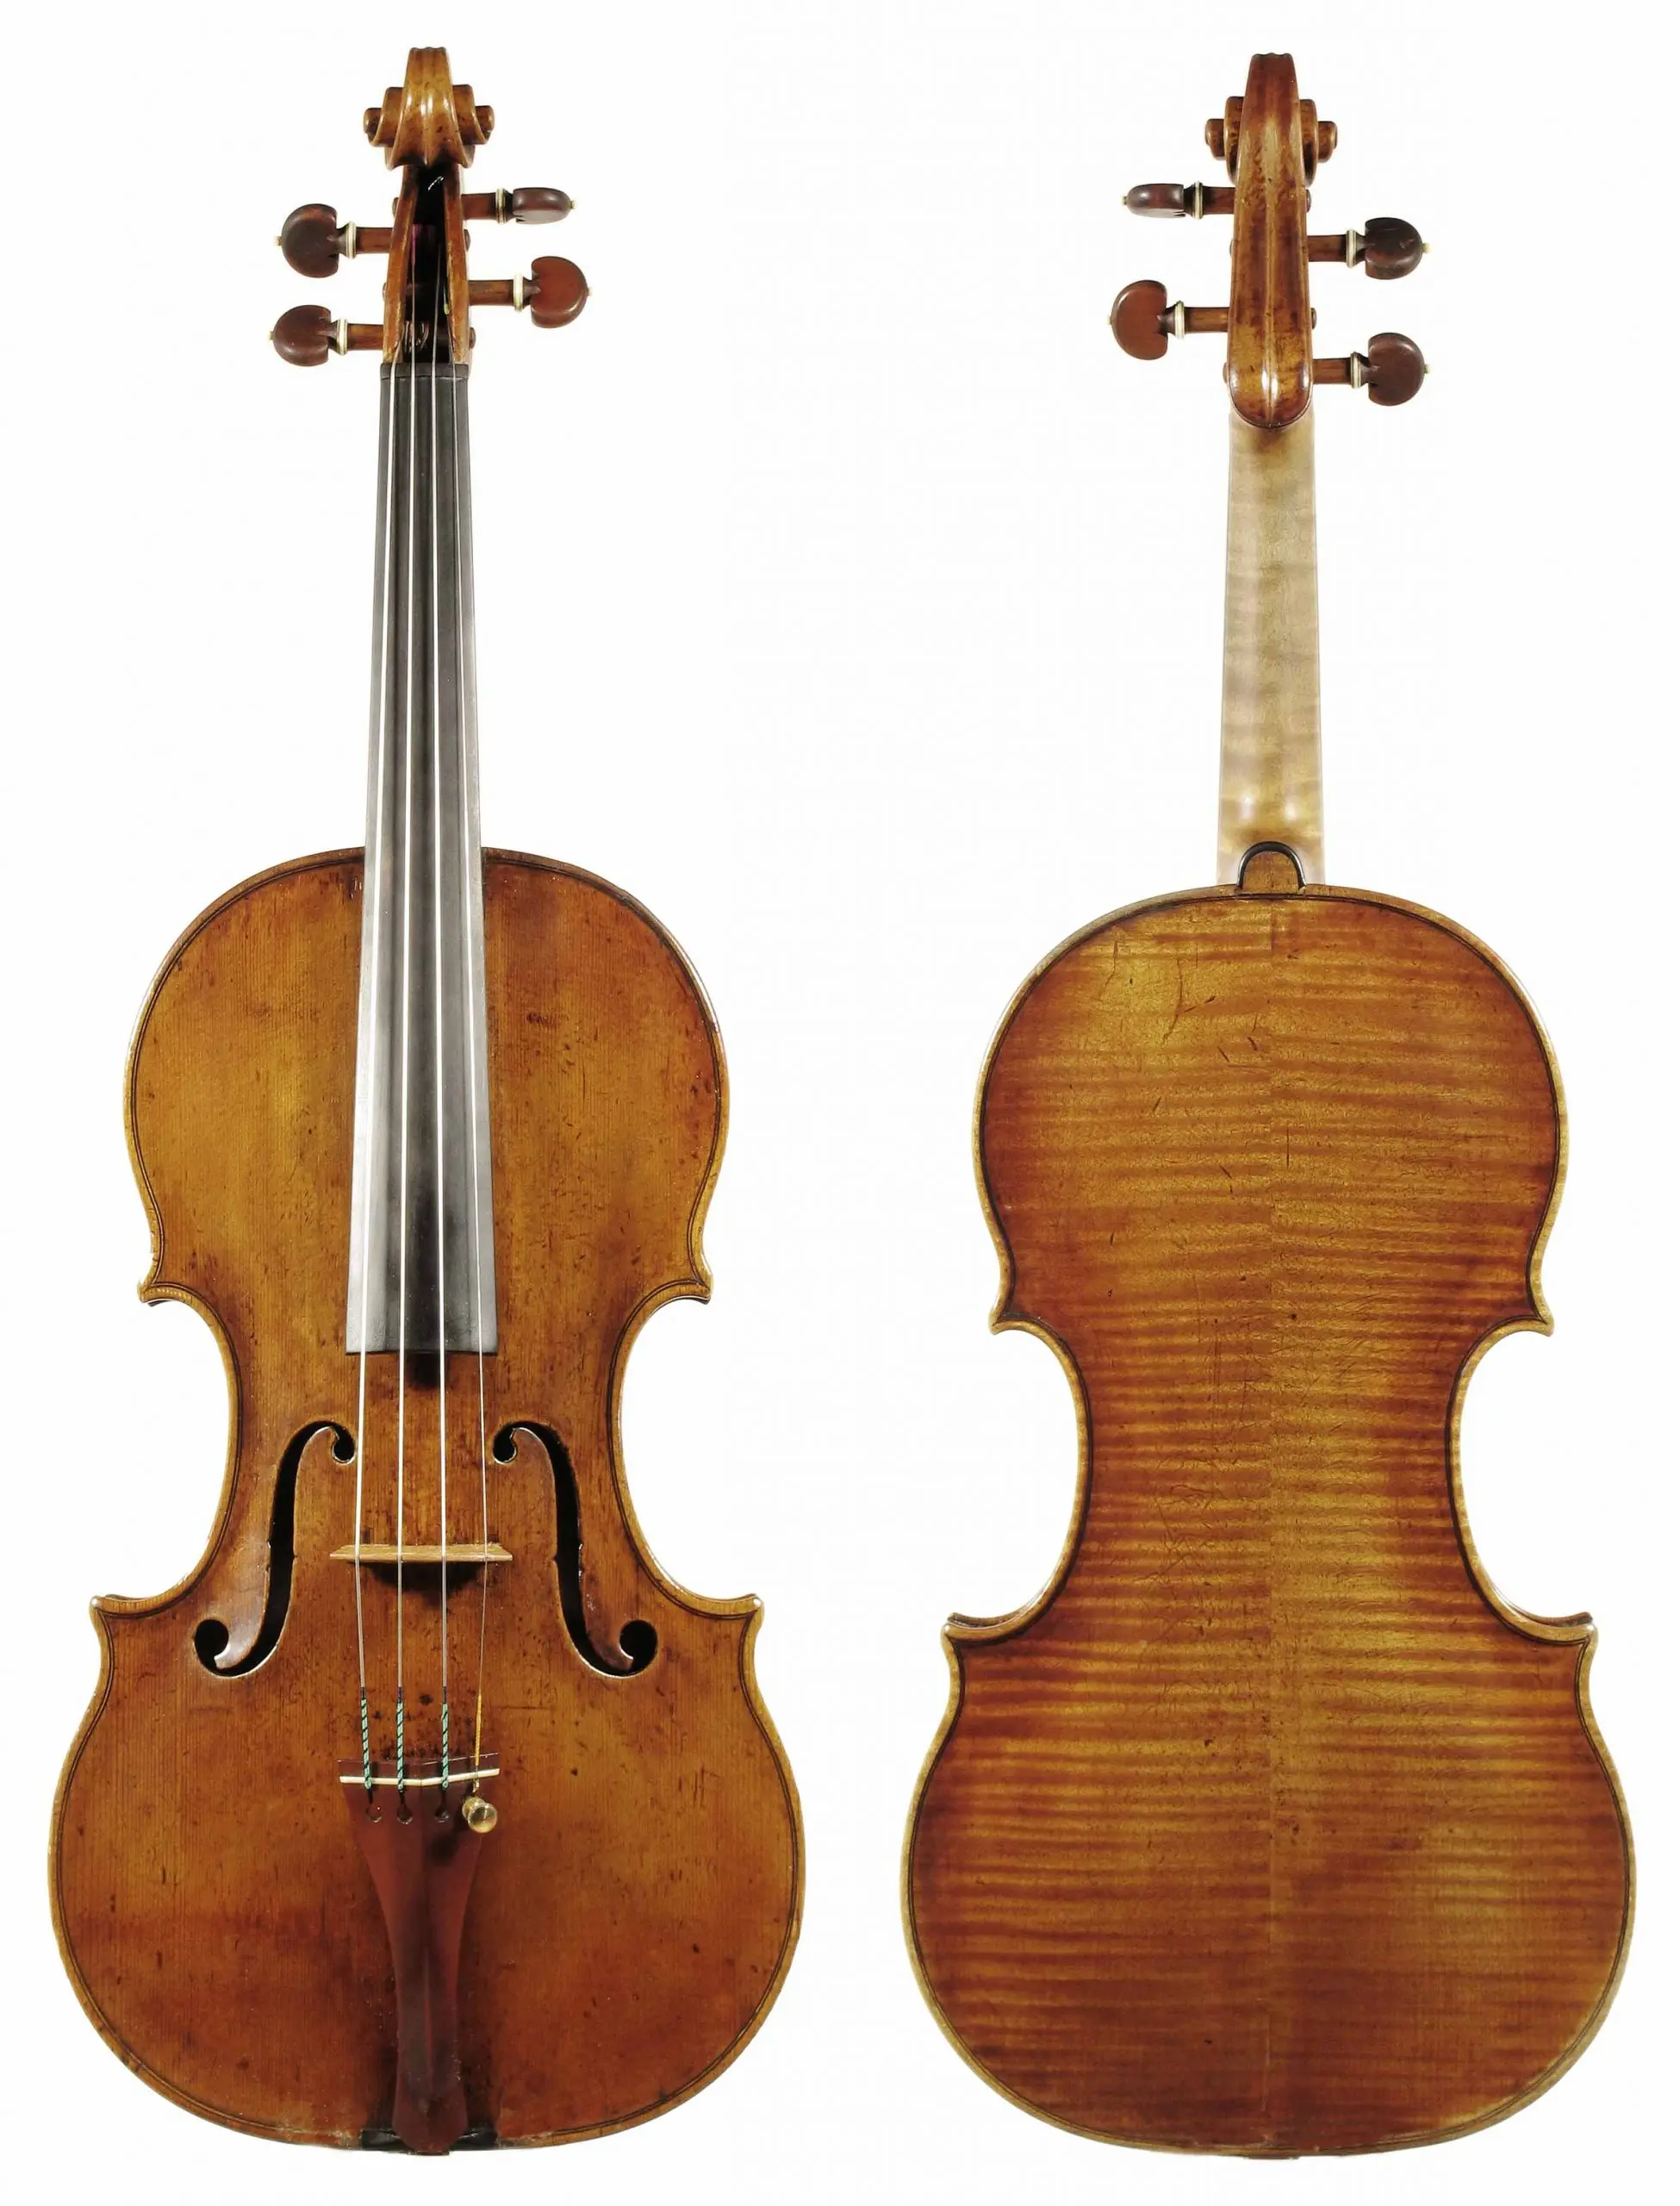 jakob steiner violin - How many Amati violins are there